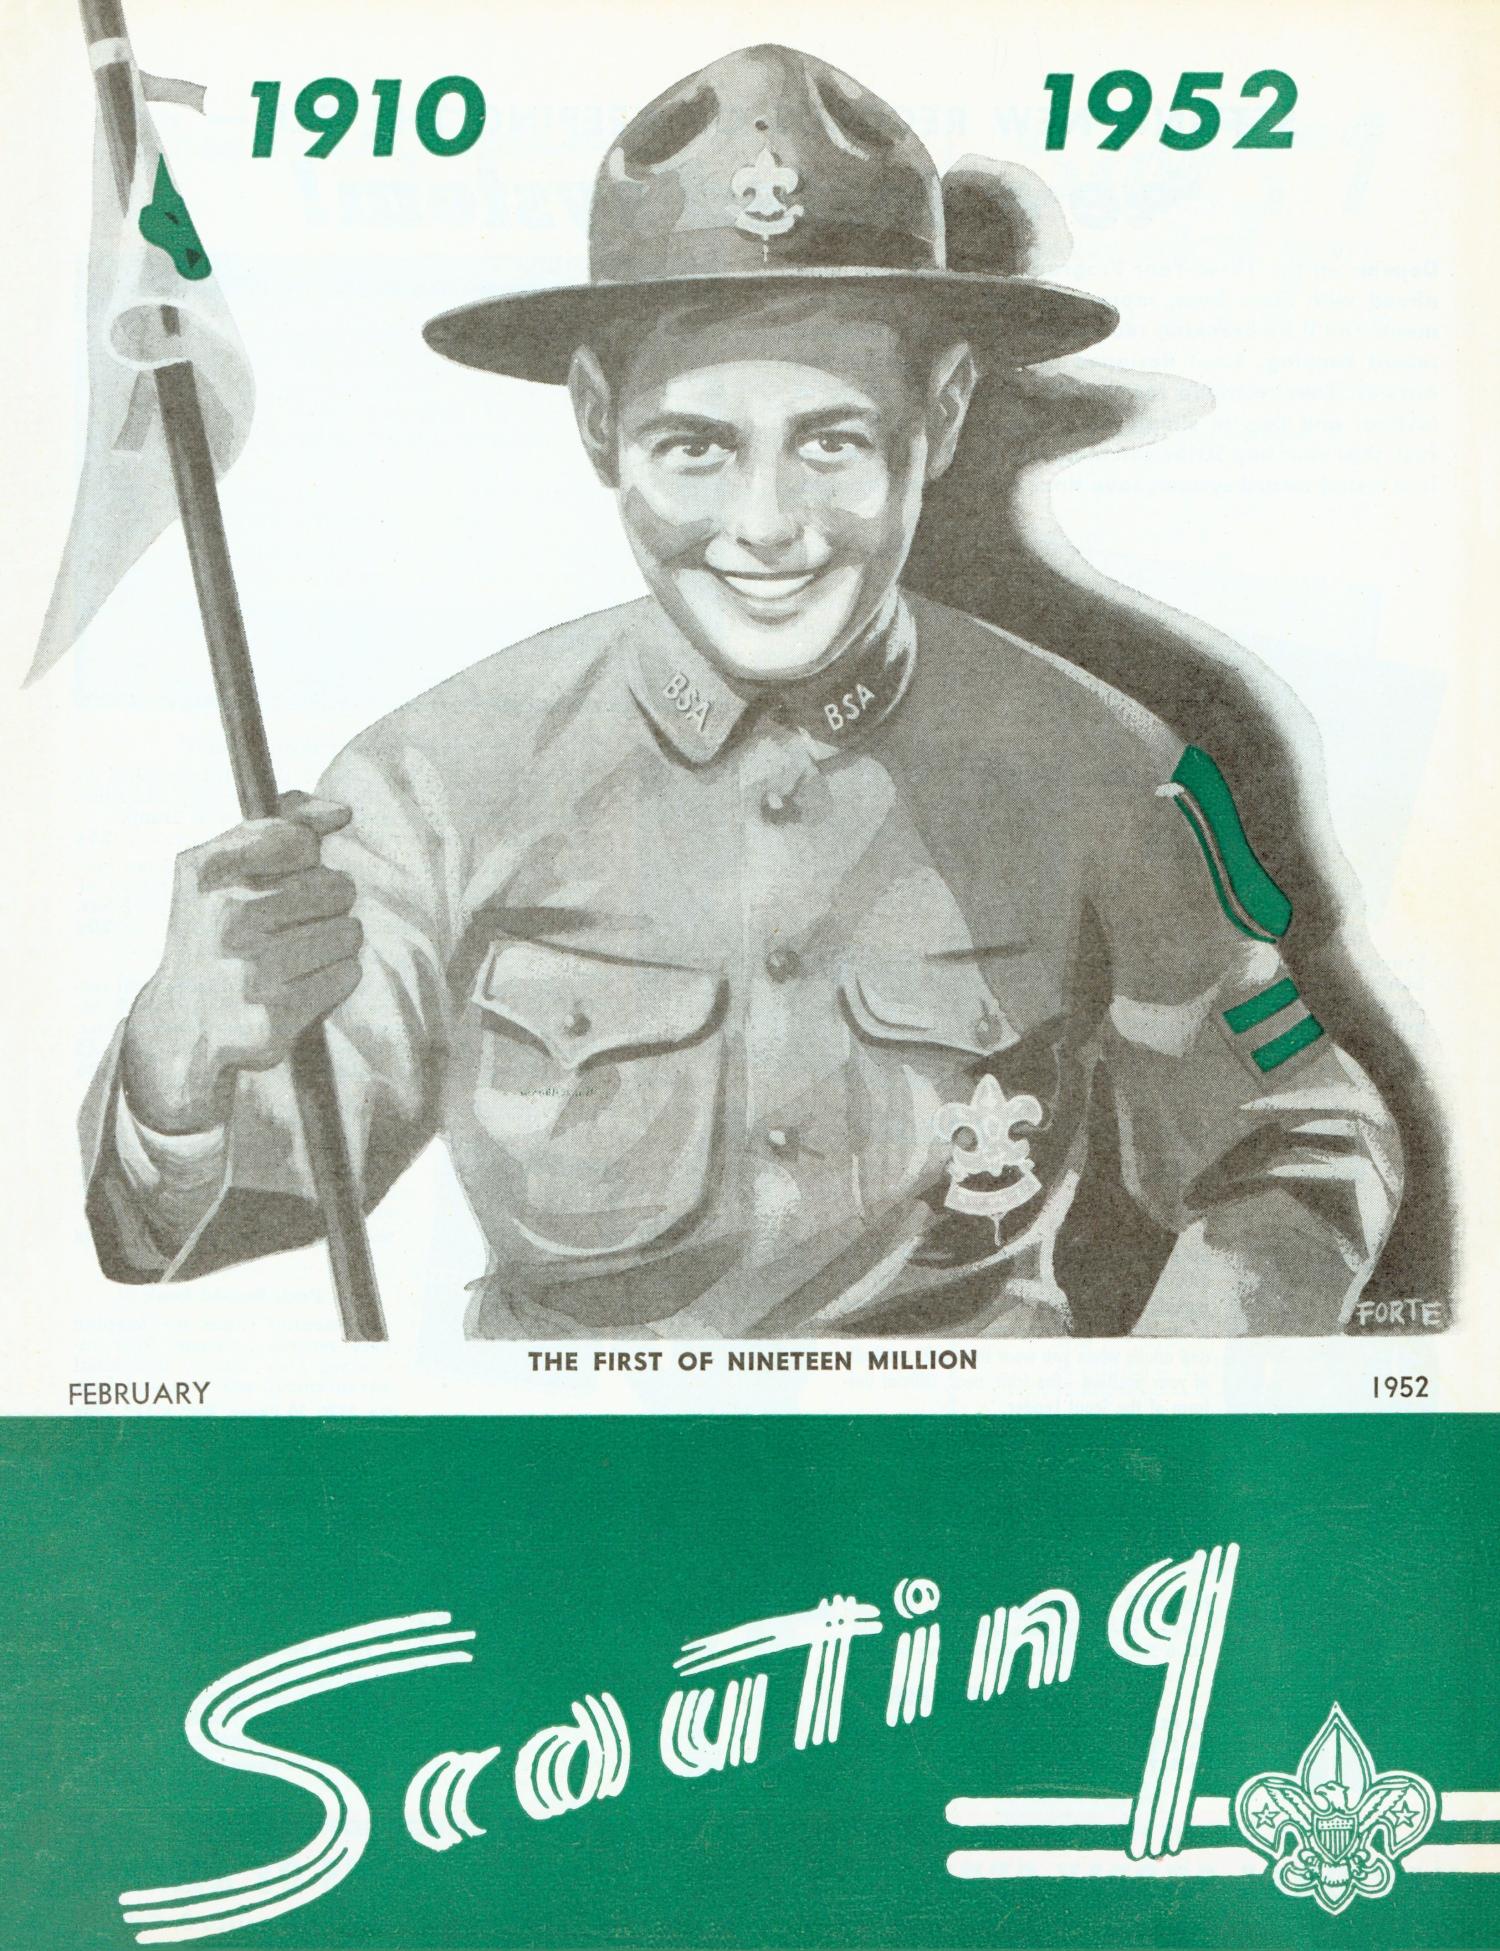 Scouting, Volume 40, Number 2, February 1952
                                                
                                                    Front Cover
                                                